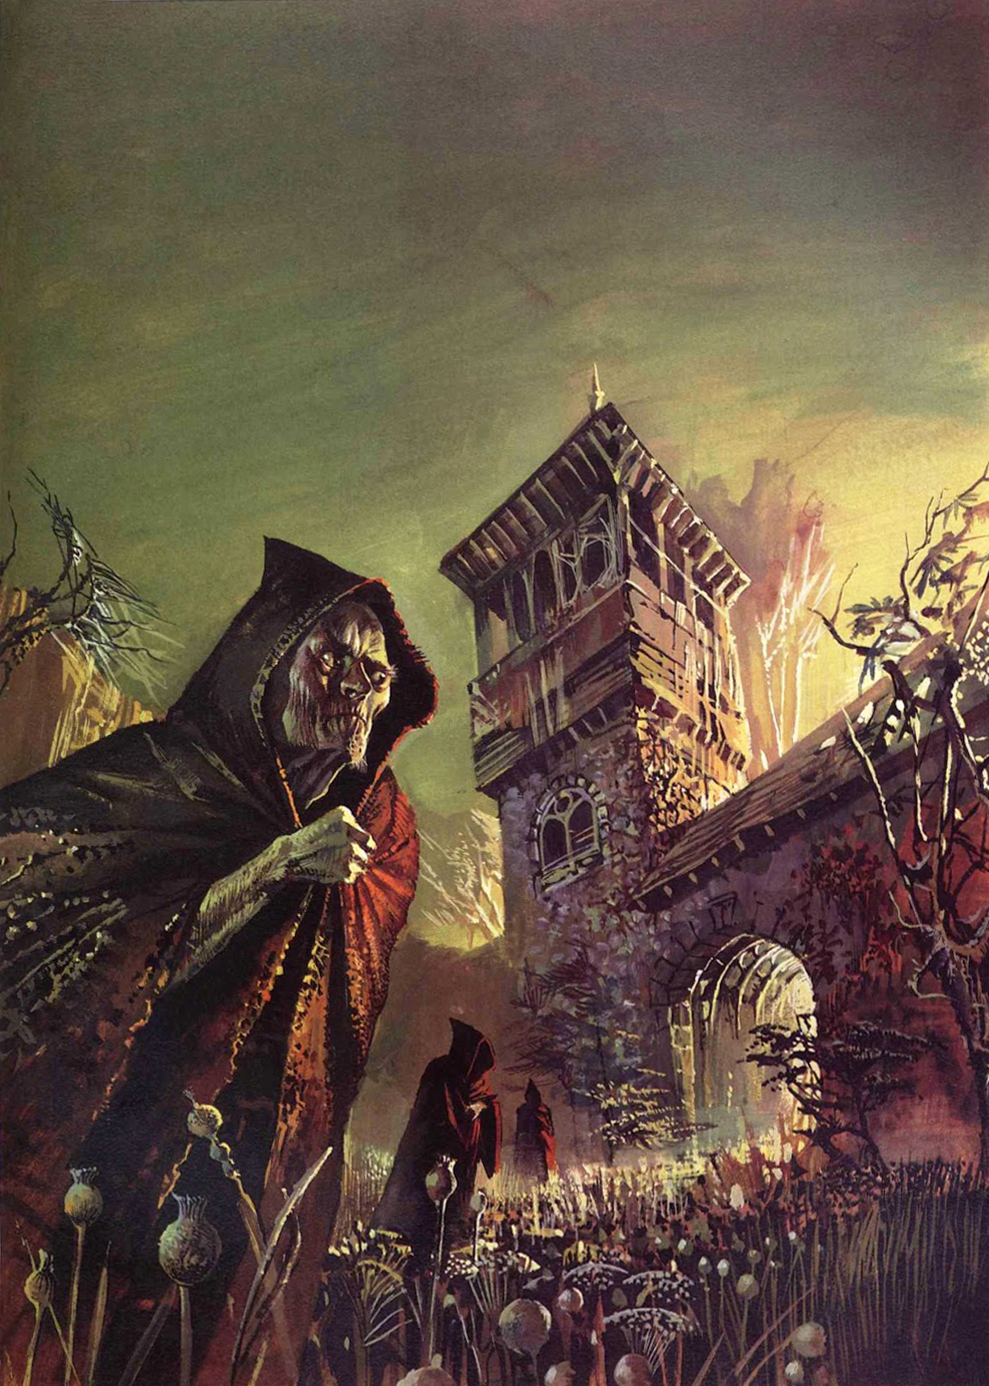 Bruce Pennington - H. P. Lovecraft & Others, Tales Of The Cthulhu Mythos Vol. 2, 1974